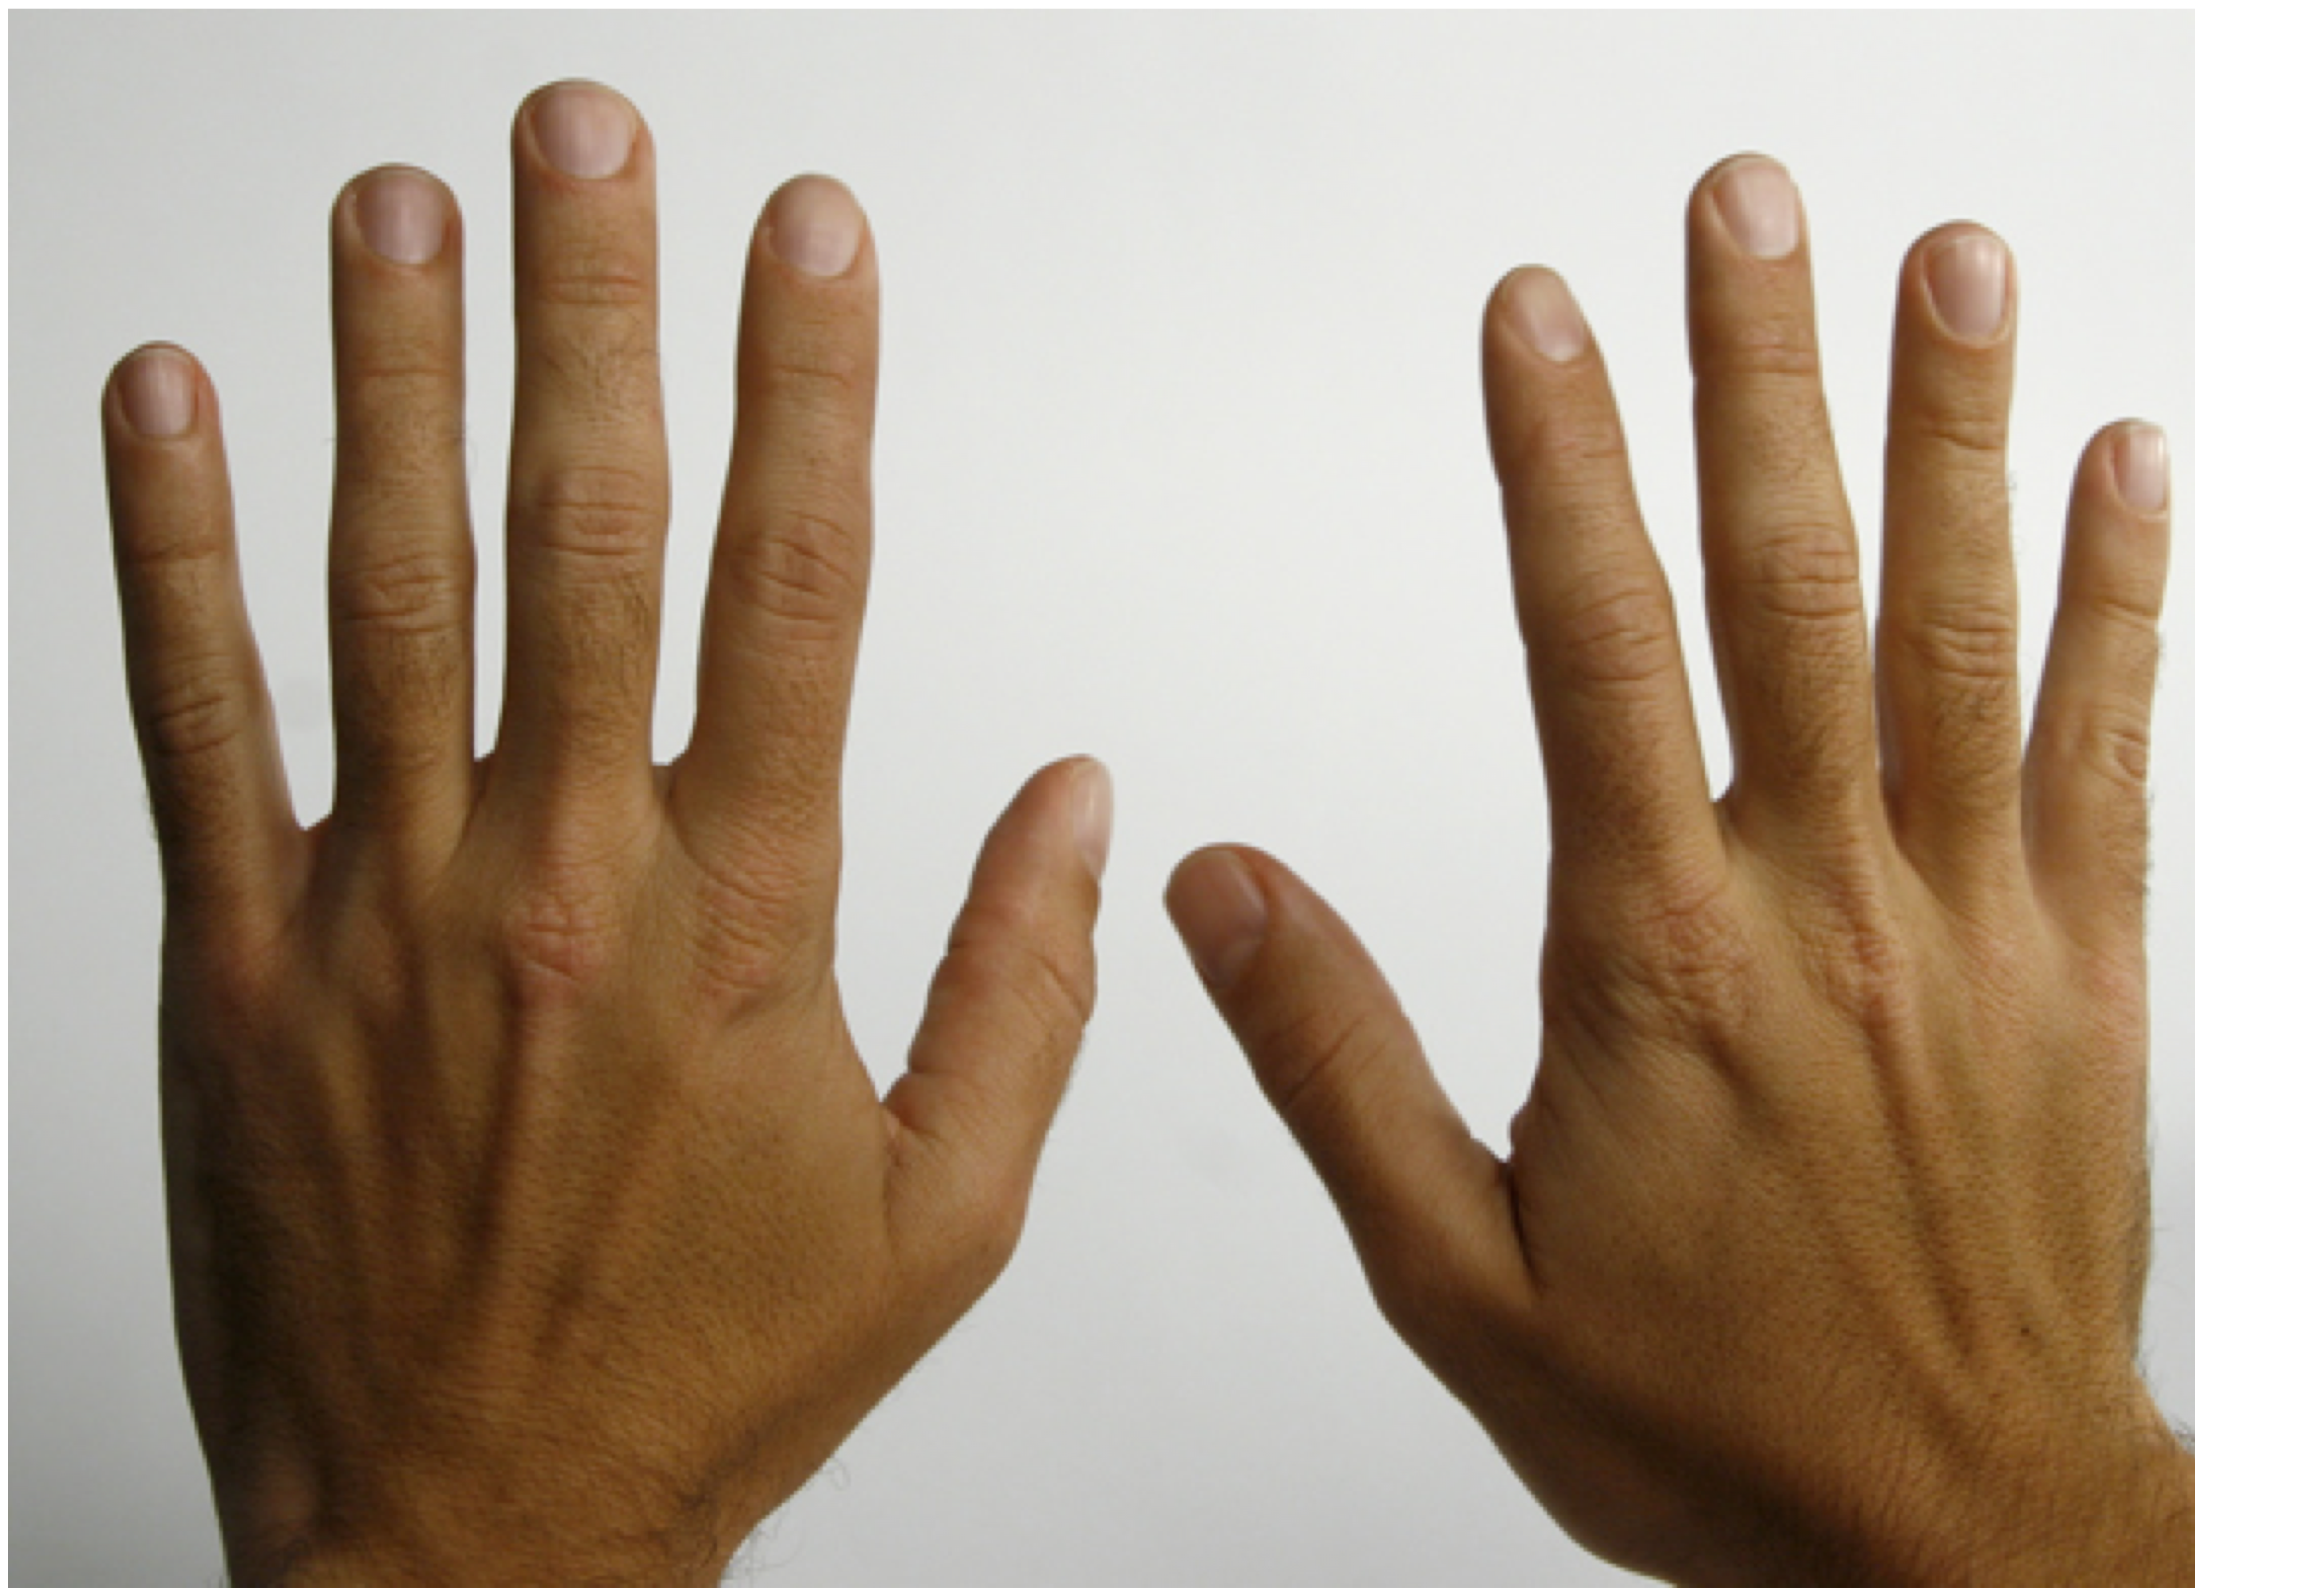 Two hands held up with palms facing out.